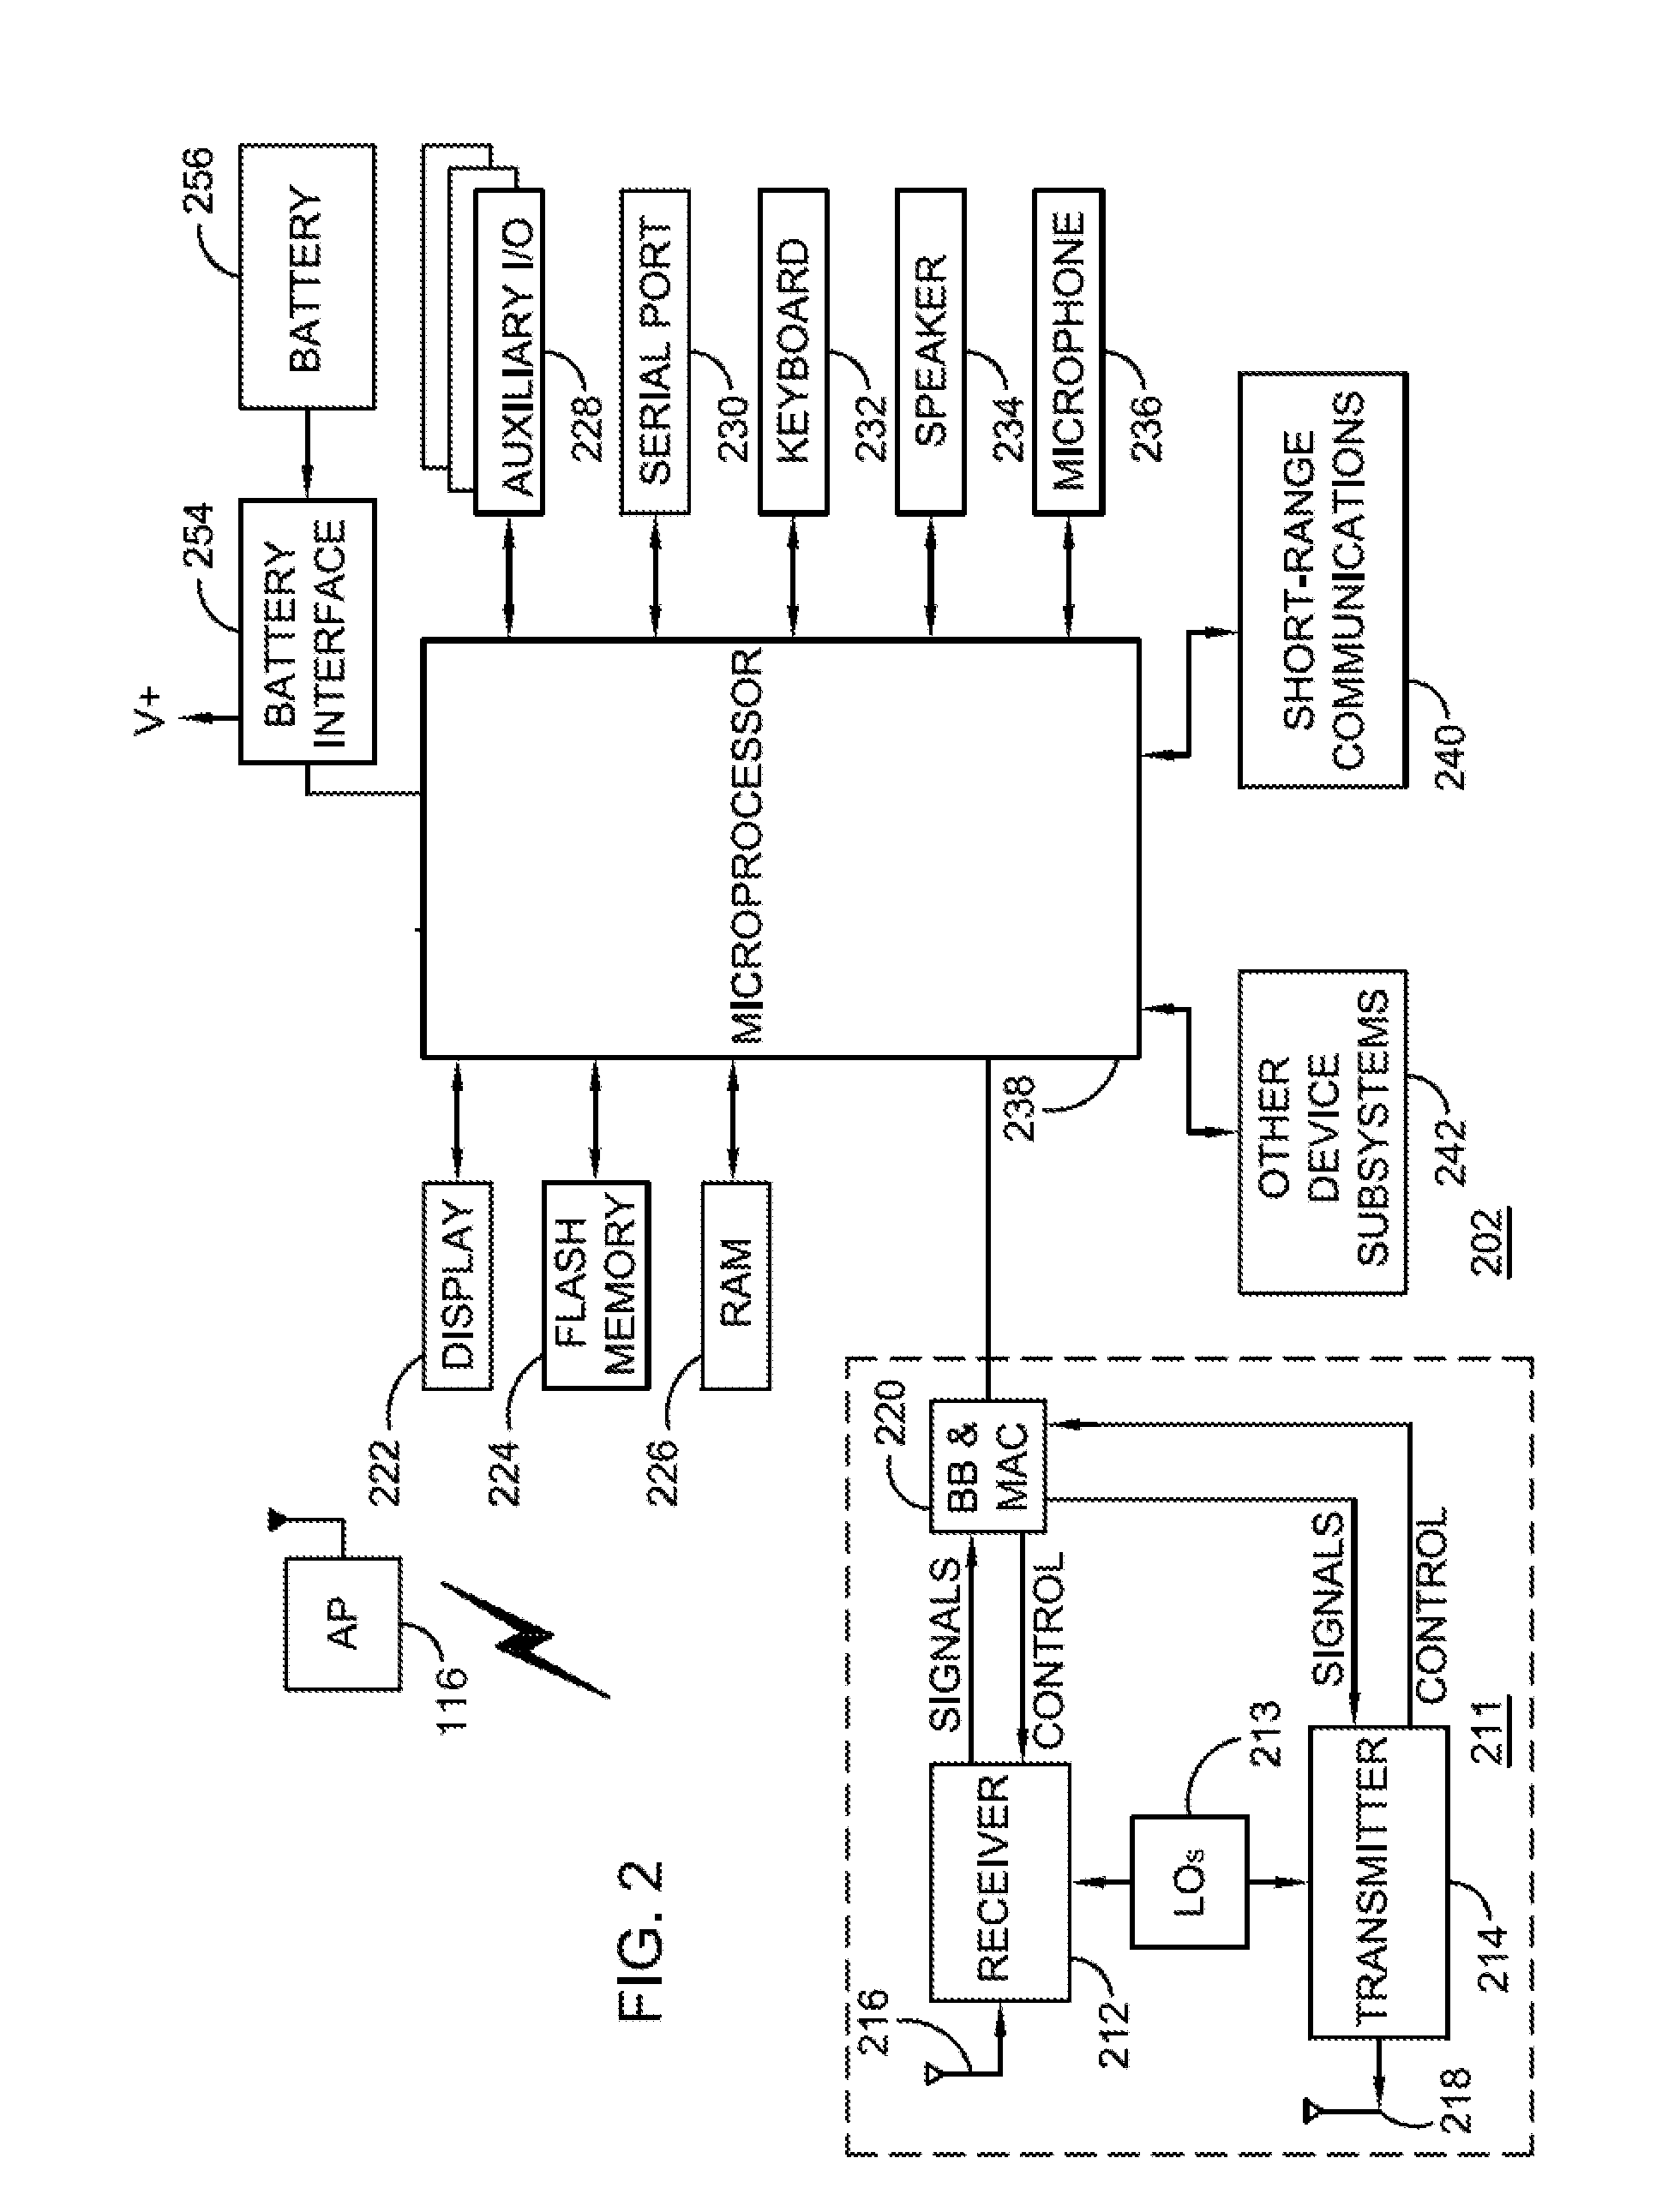 Methods And Apparatus For Use In Facilitating Access To Aggregator Services For Mobile Communication Devices Via Wireless Communication Networks